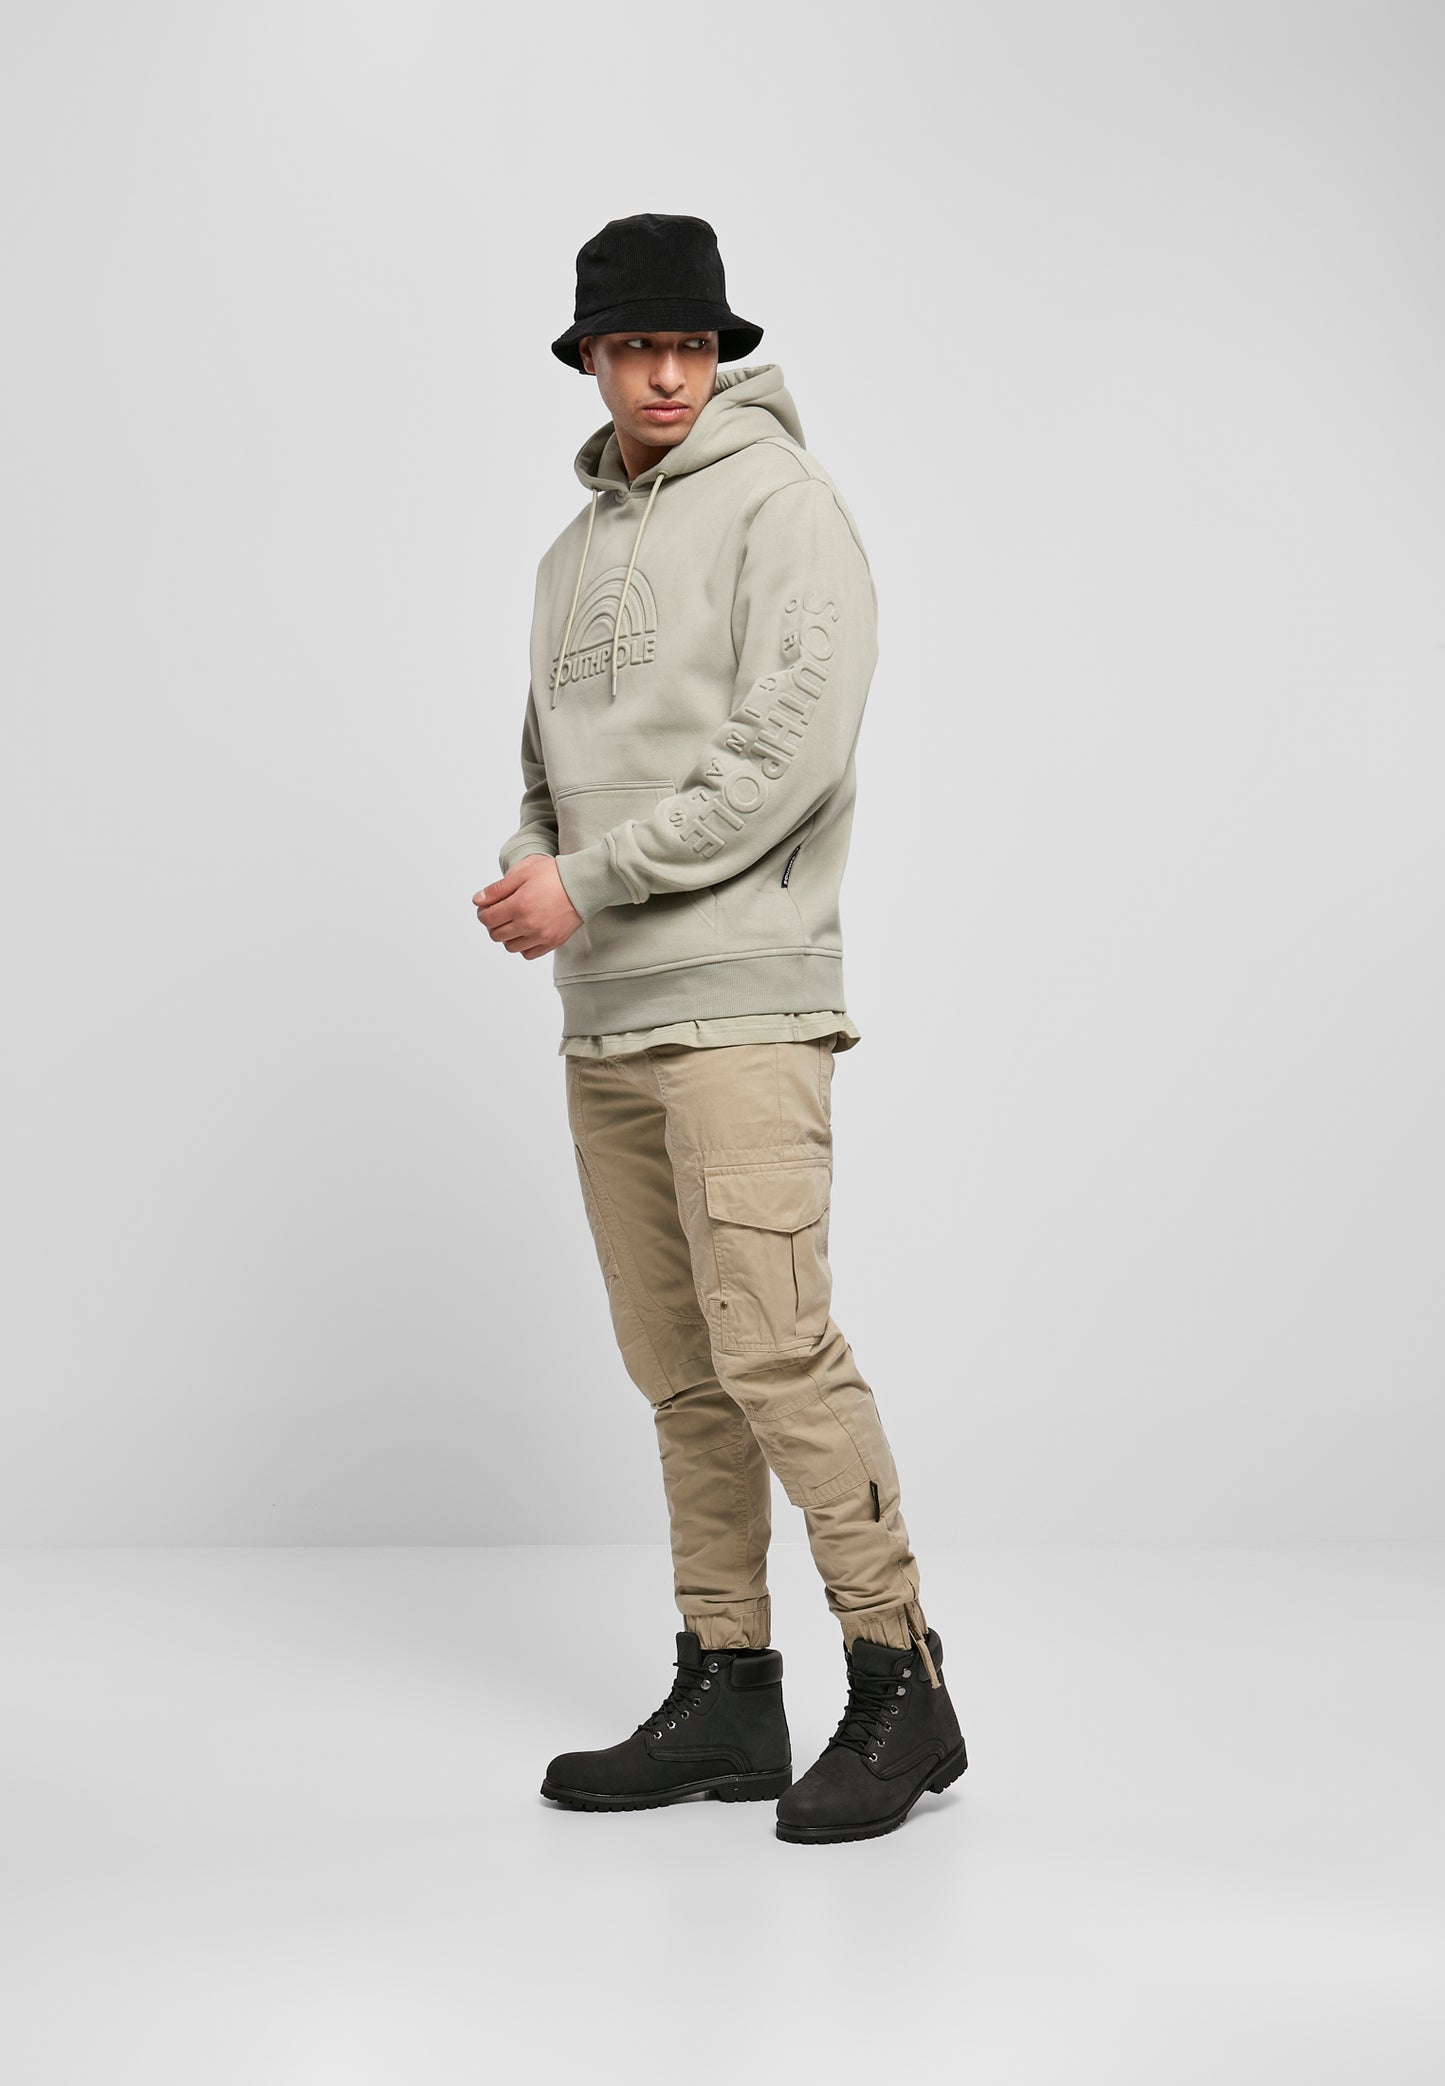 Southpole 3D Print Hoody in Teagreen